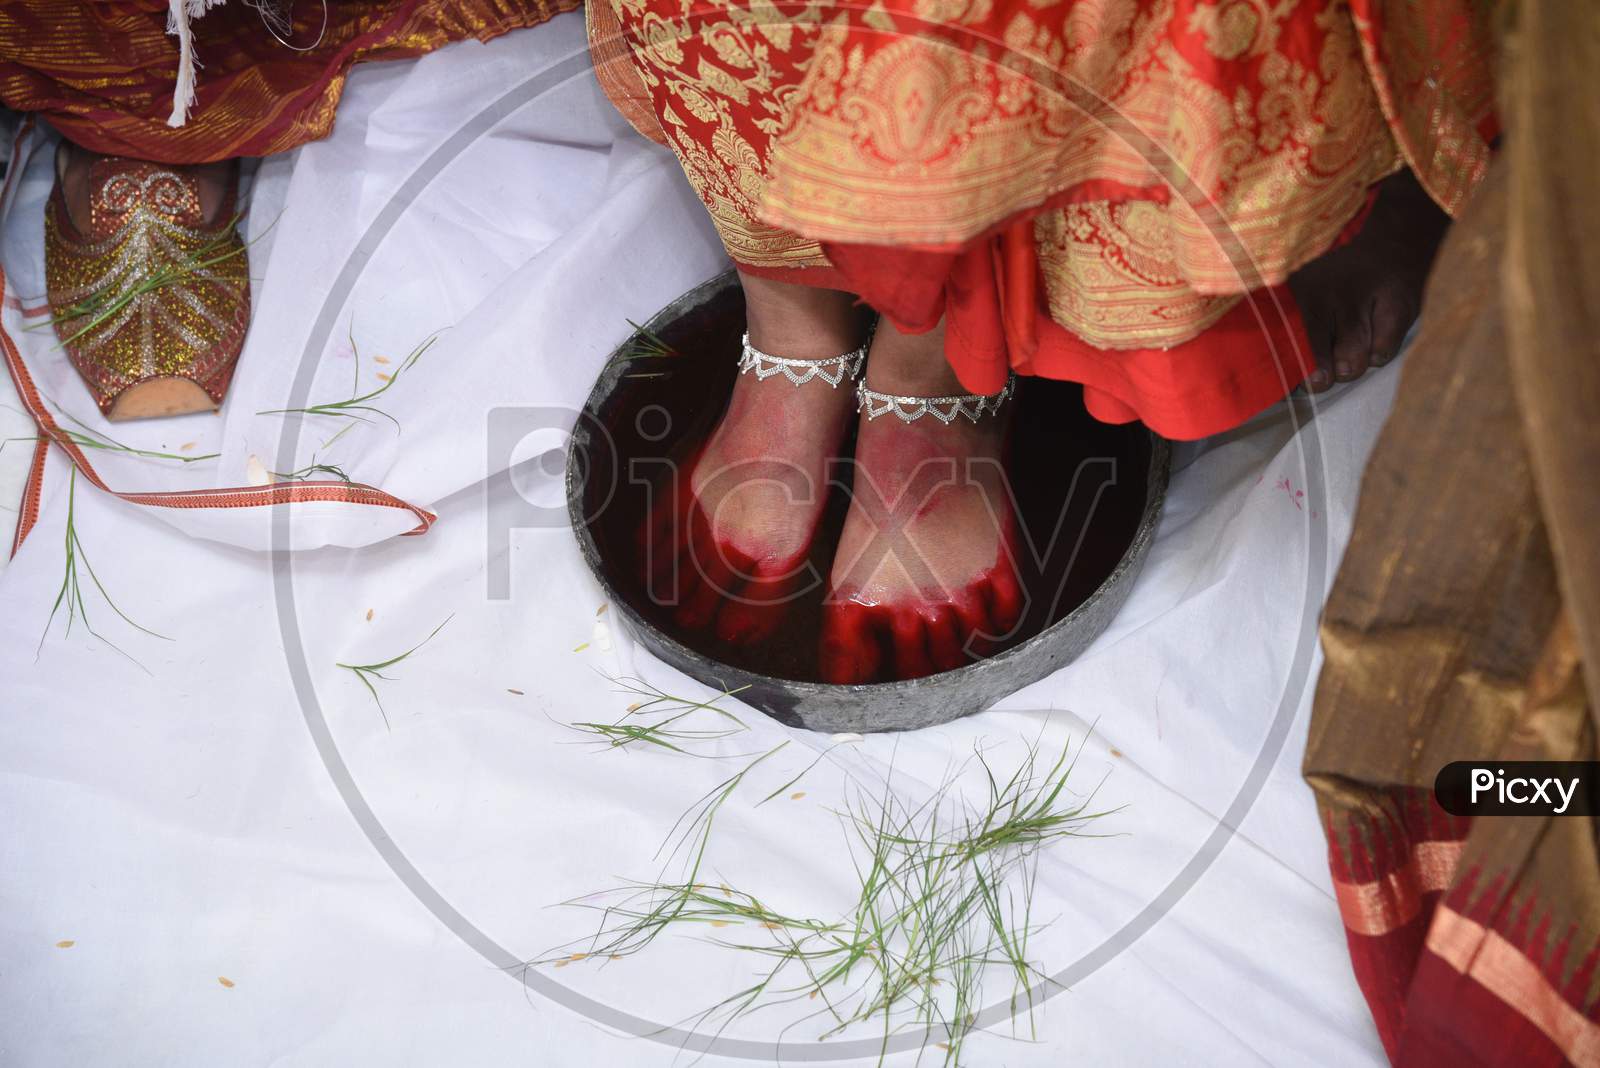 Bengali Bride'S Keeping First Foot In Milk And Rose Petal Tray At Husband'S House.